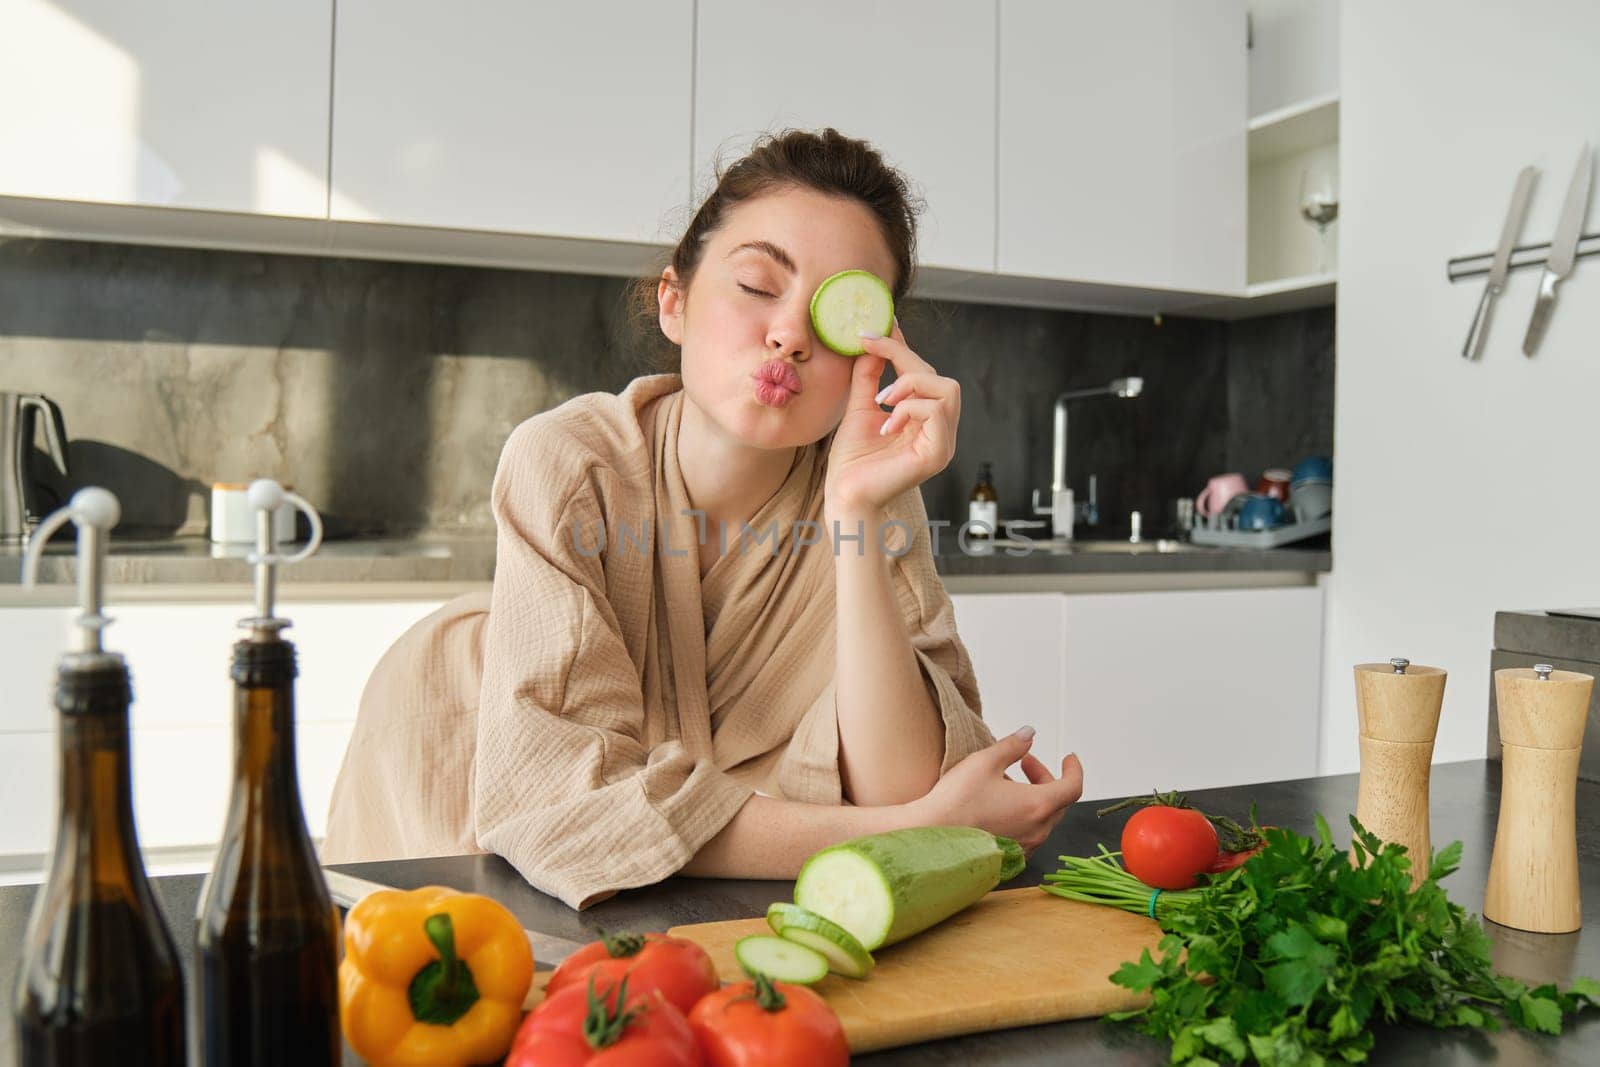 Portrait of cute young woman in bathrobe, cooking meal, standing near chopping board with vegetables, holding zucchini, making salad or vegetarian dinner.